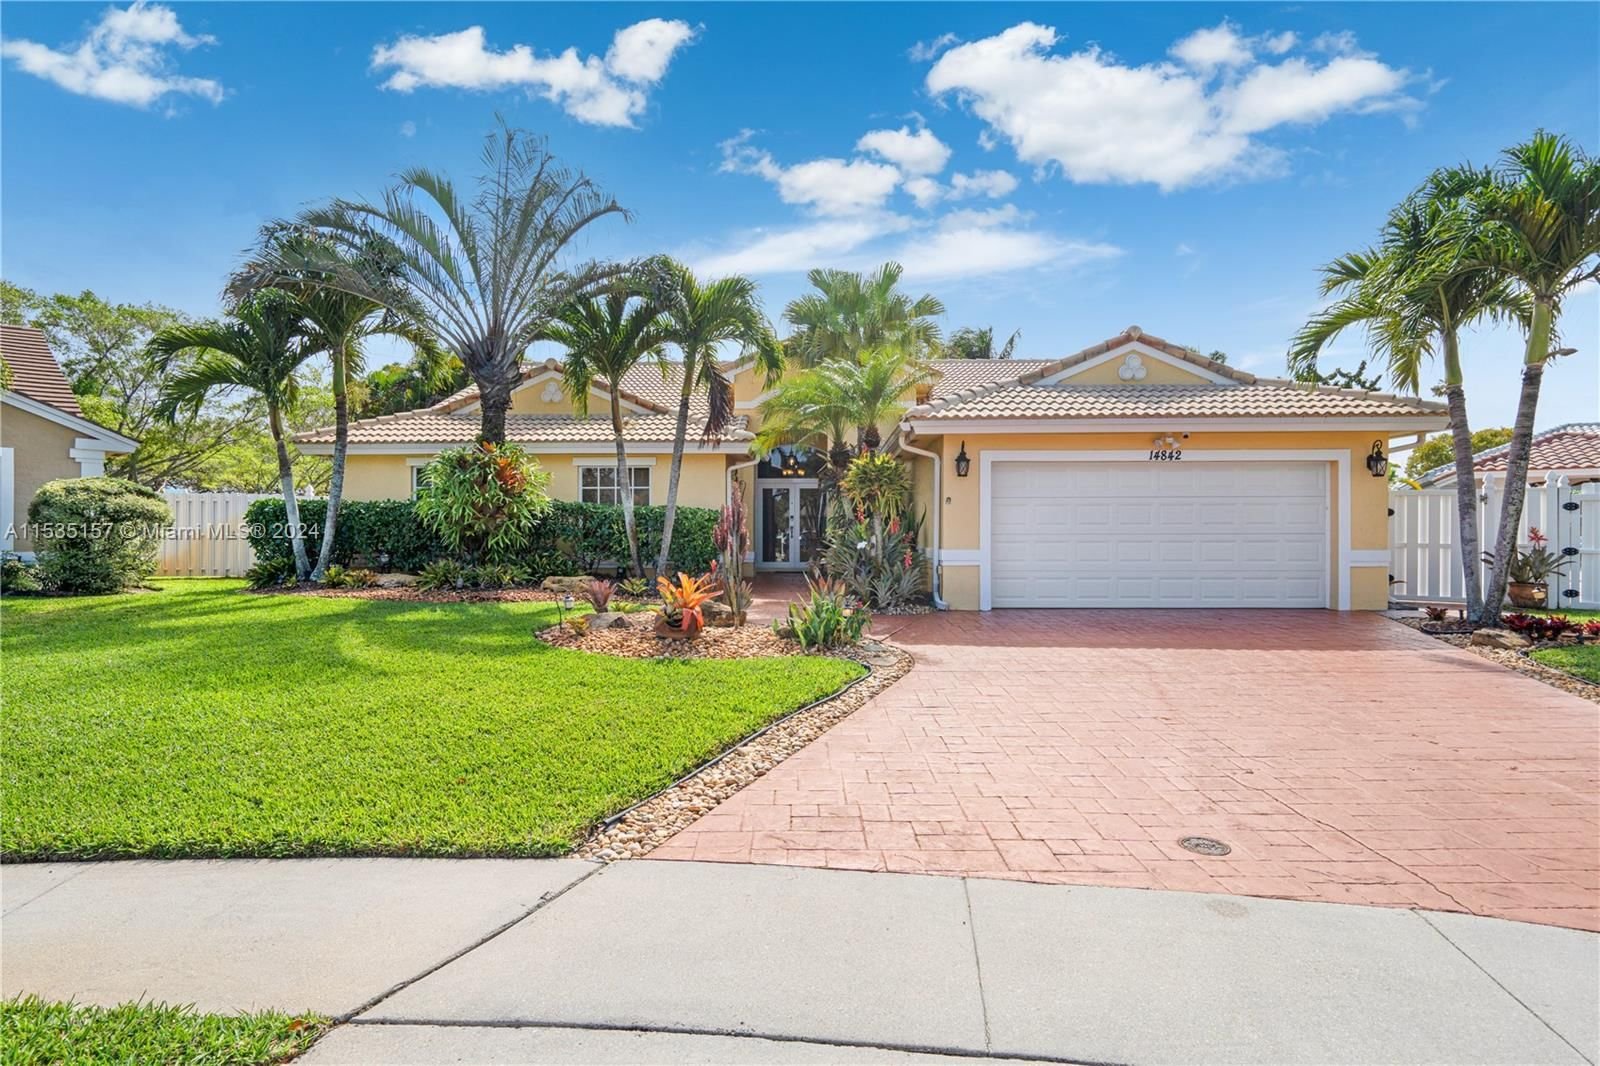 Real estate property located at 14842 42nd Ct, Broward County, REPLAT OF COUNTRY LAKES, Miramar, FL